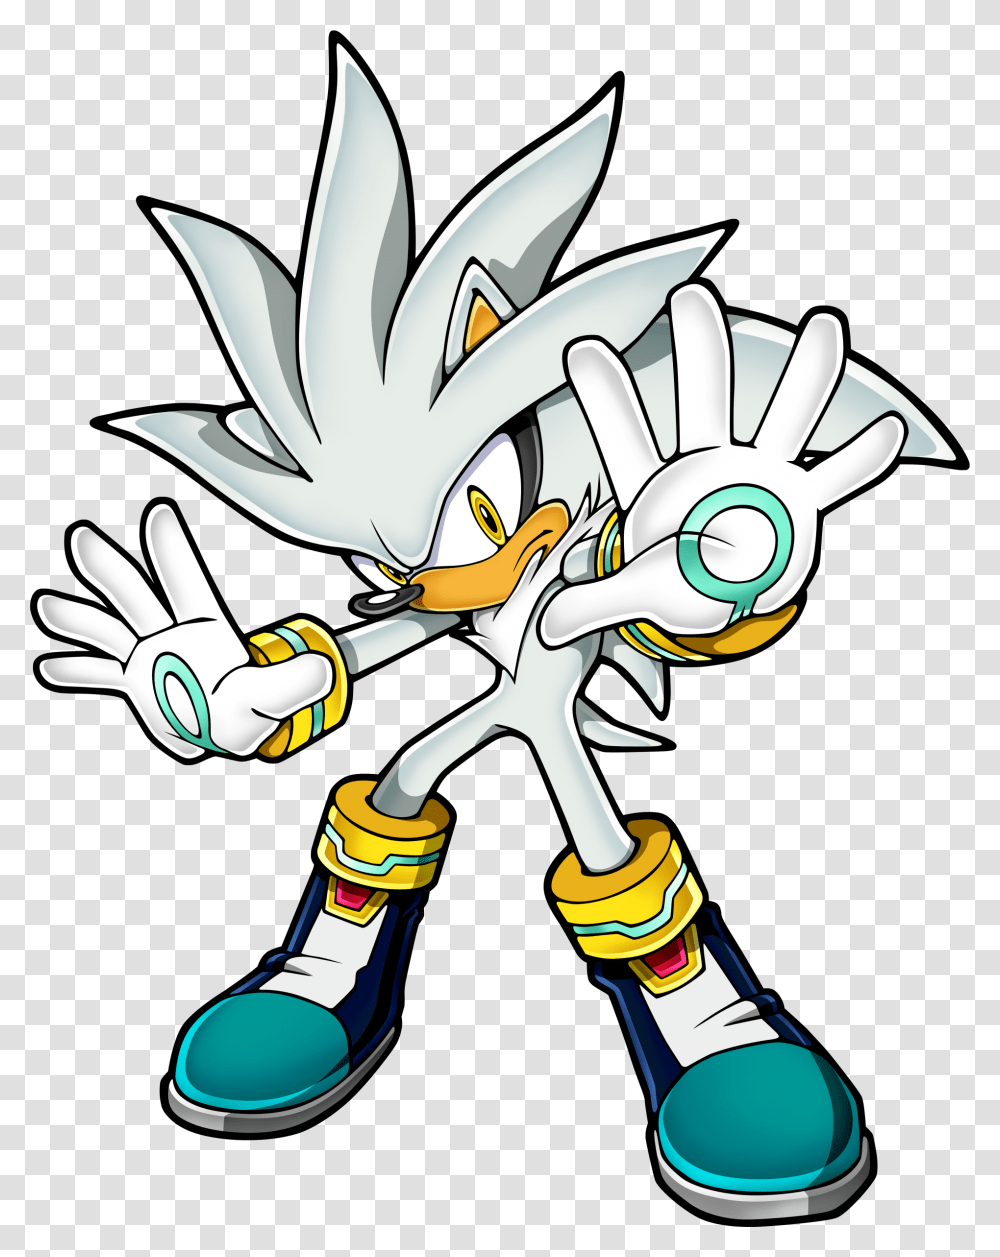 Silver From Sonic The Hedgehog Clipart Download Sonic The Hedgehog Silver, Leisure Activities Transparent Png